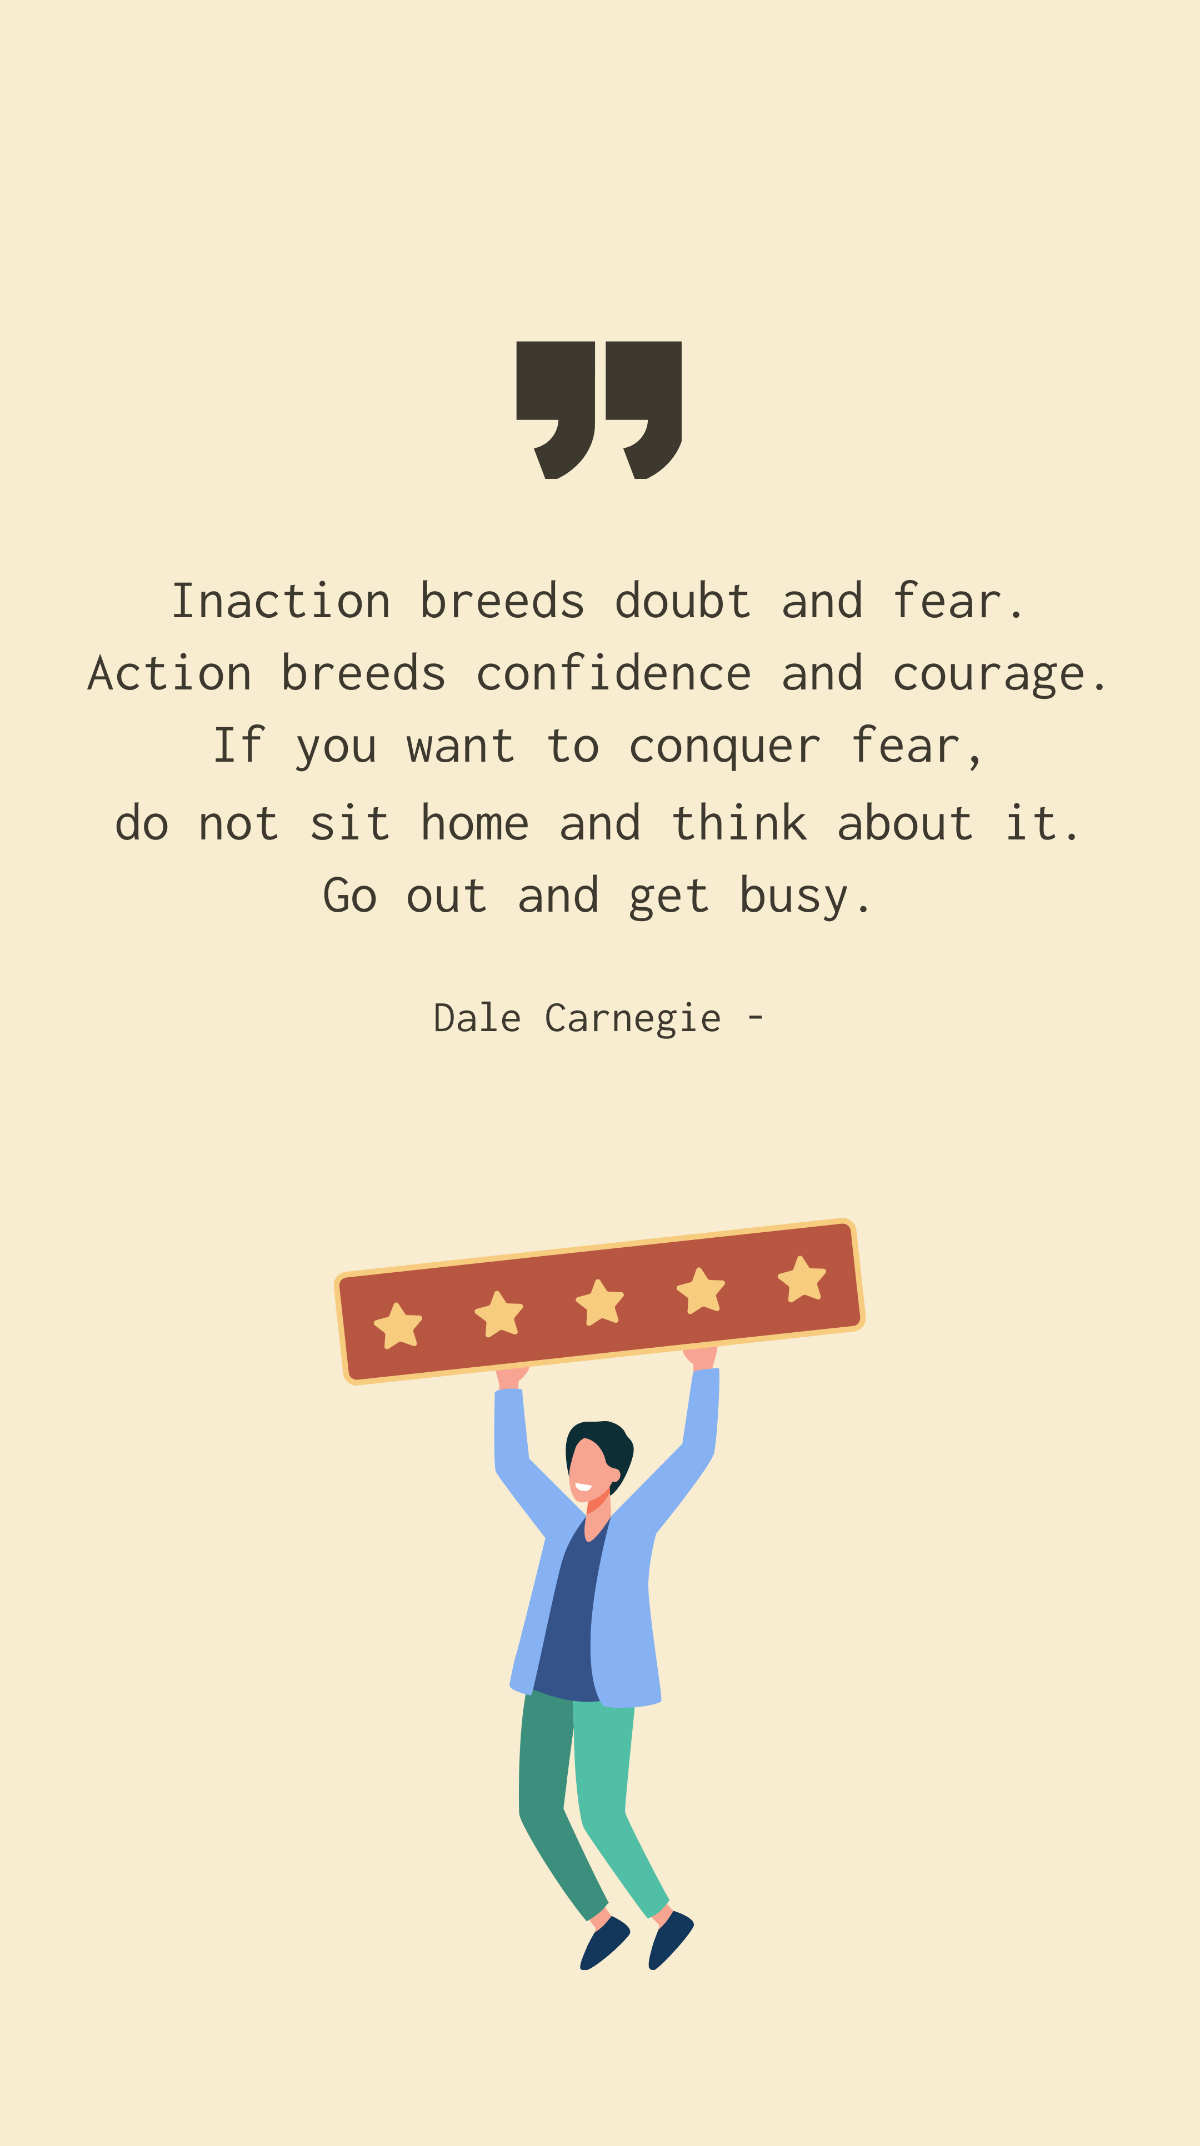 Dale Carnegie - Inaction breeds doubt and fear. Action breeds confidence and courage. If you want to conquer fear, do not sit home and think about it. Go out and get busy.